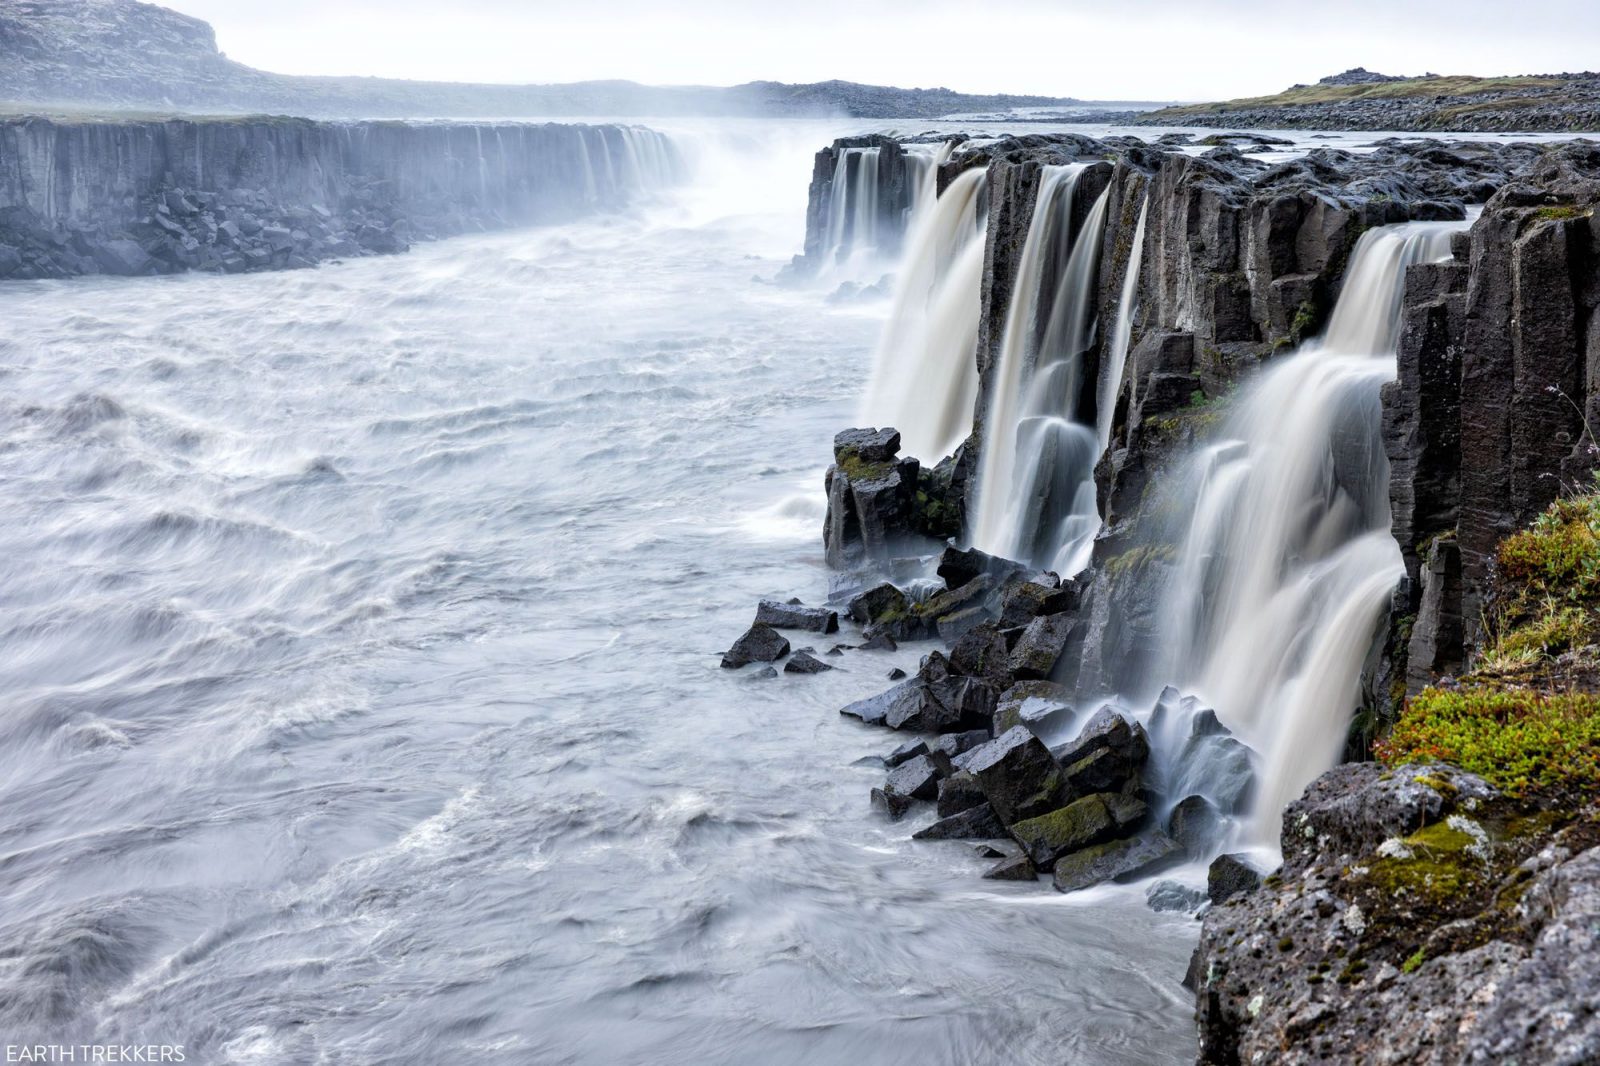 Are You a Master of General Knowledge? Take This True or False Quiz to Find Out Iceland